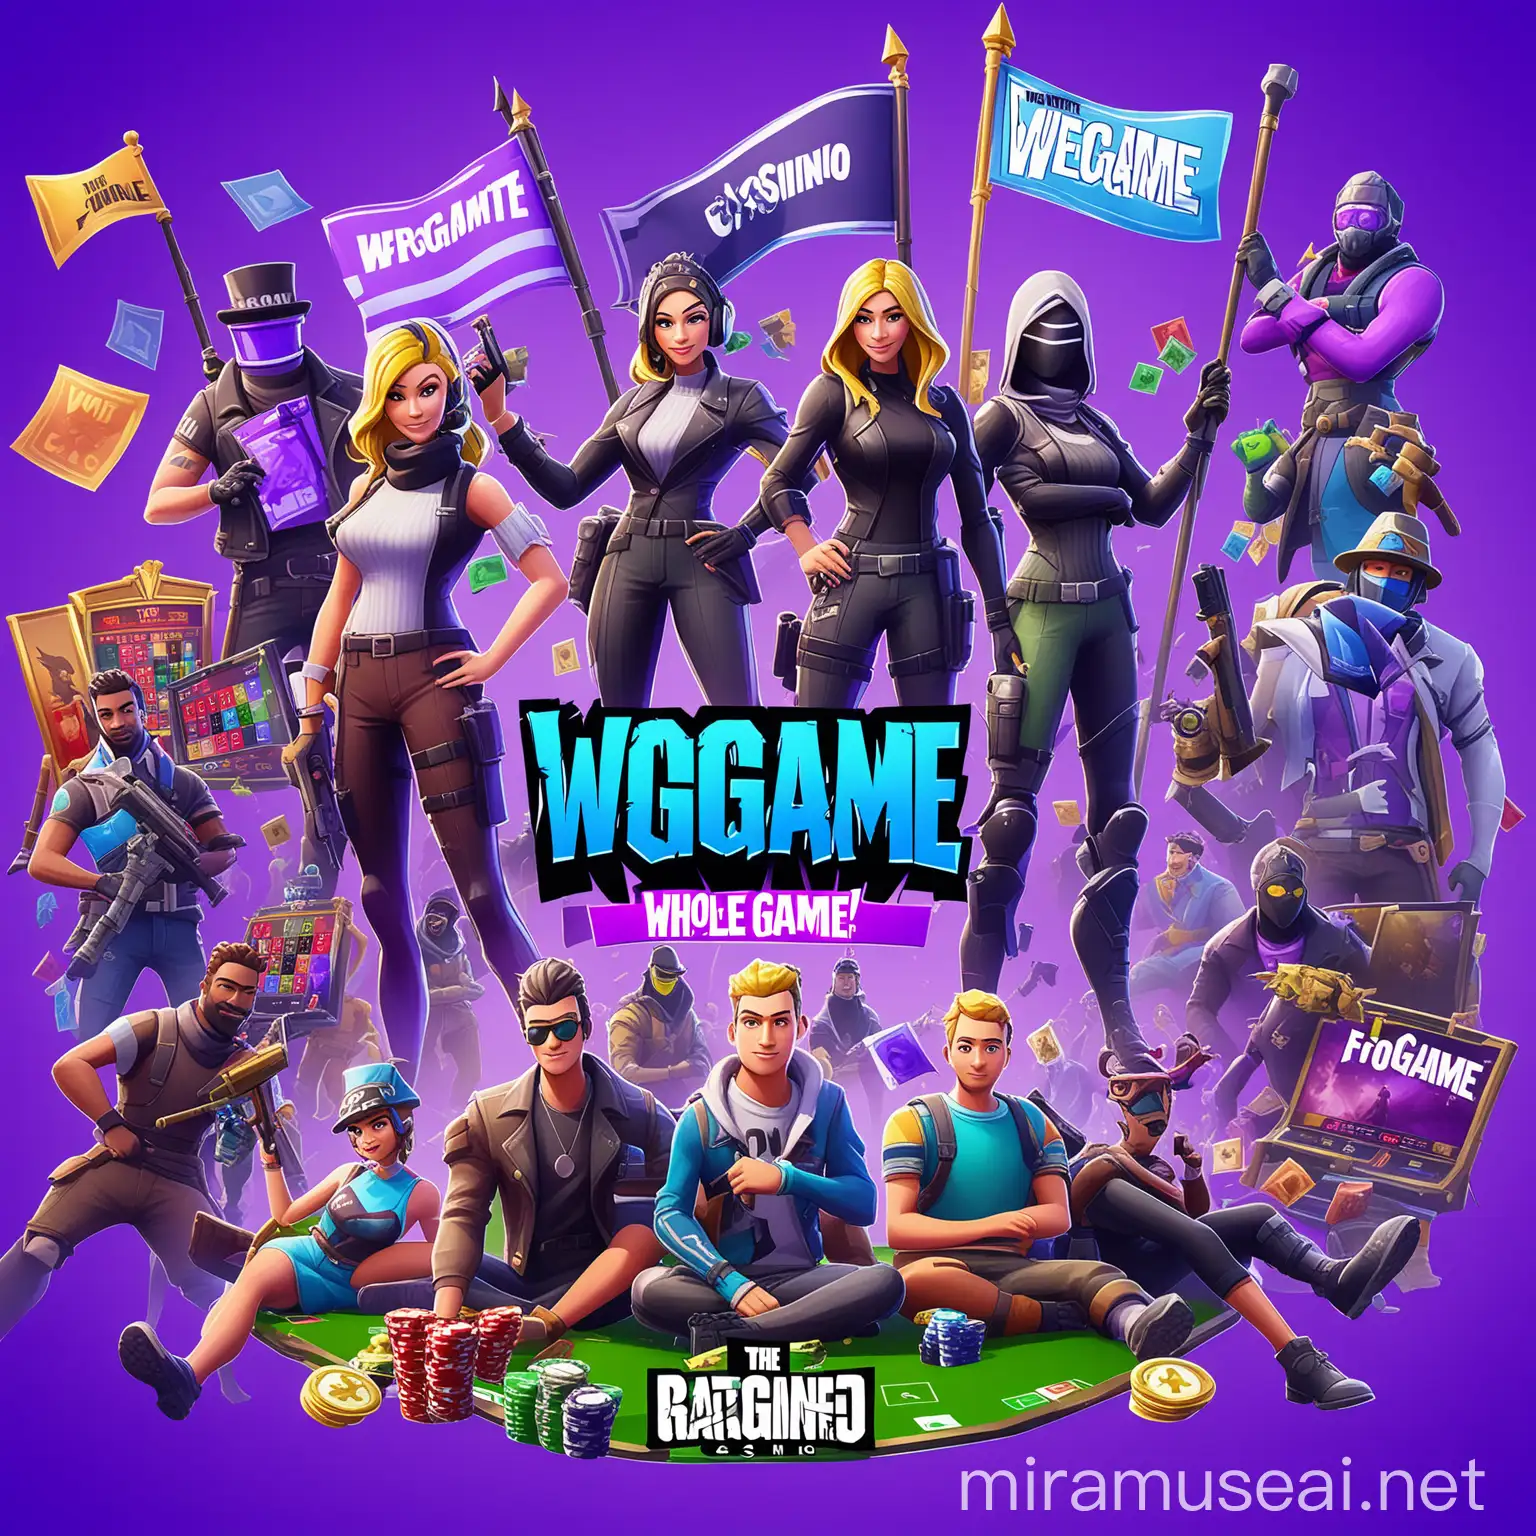 WeGame Online Fortnite Casino with Flag and Characters in Purple and Blue